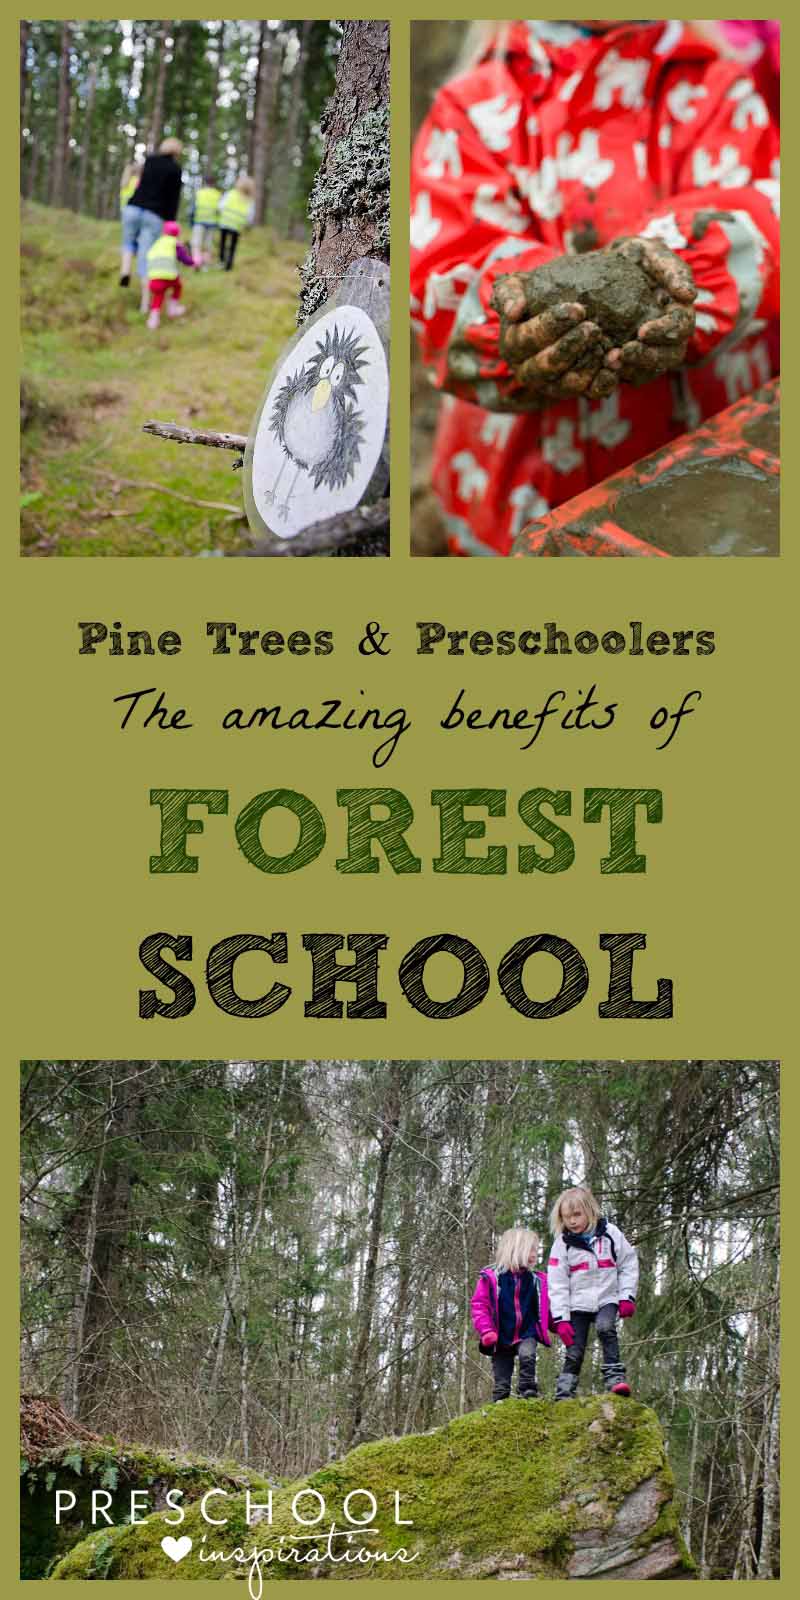 Pine Trees and Preschoolers. The Amazing Benefits of Forest School. The Scandinavian approach to outdoor learning and play is getting popular in the U.S. #preschool #prek #preschoolideas #preschoolplanning #forestschool #outdoorplay #outdoorkids